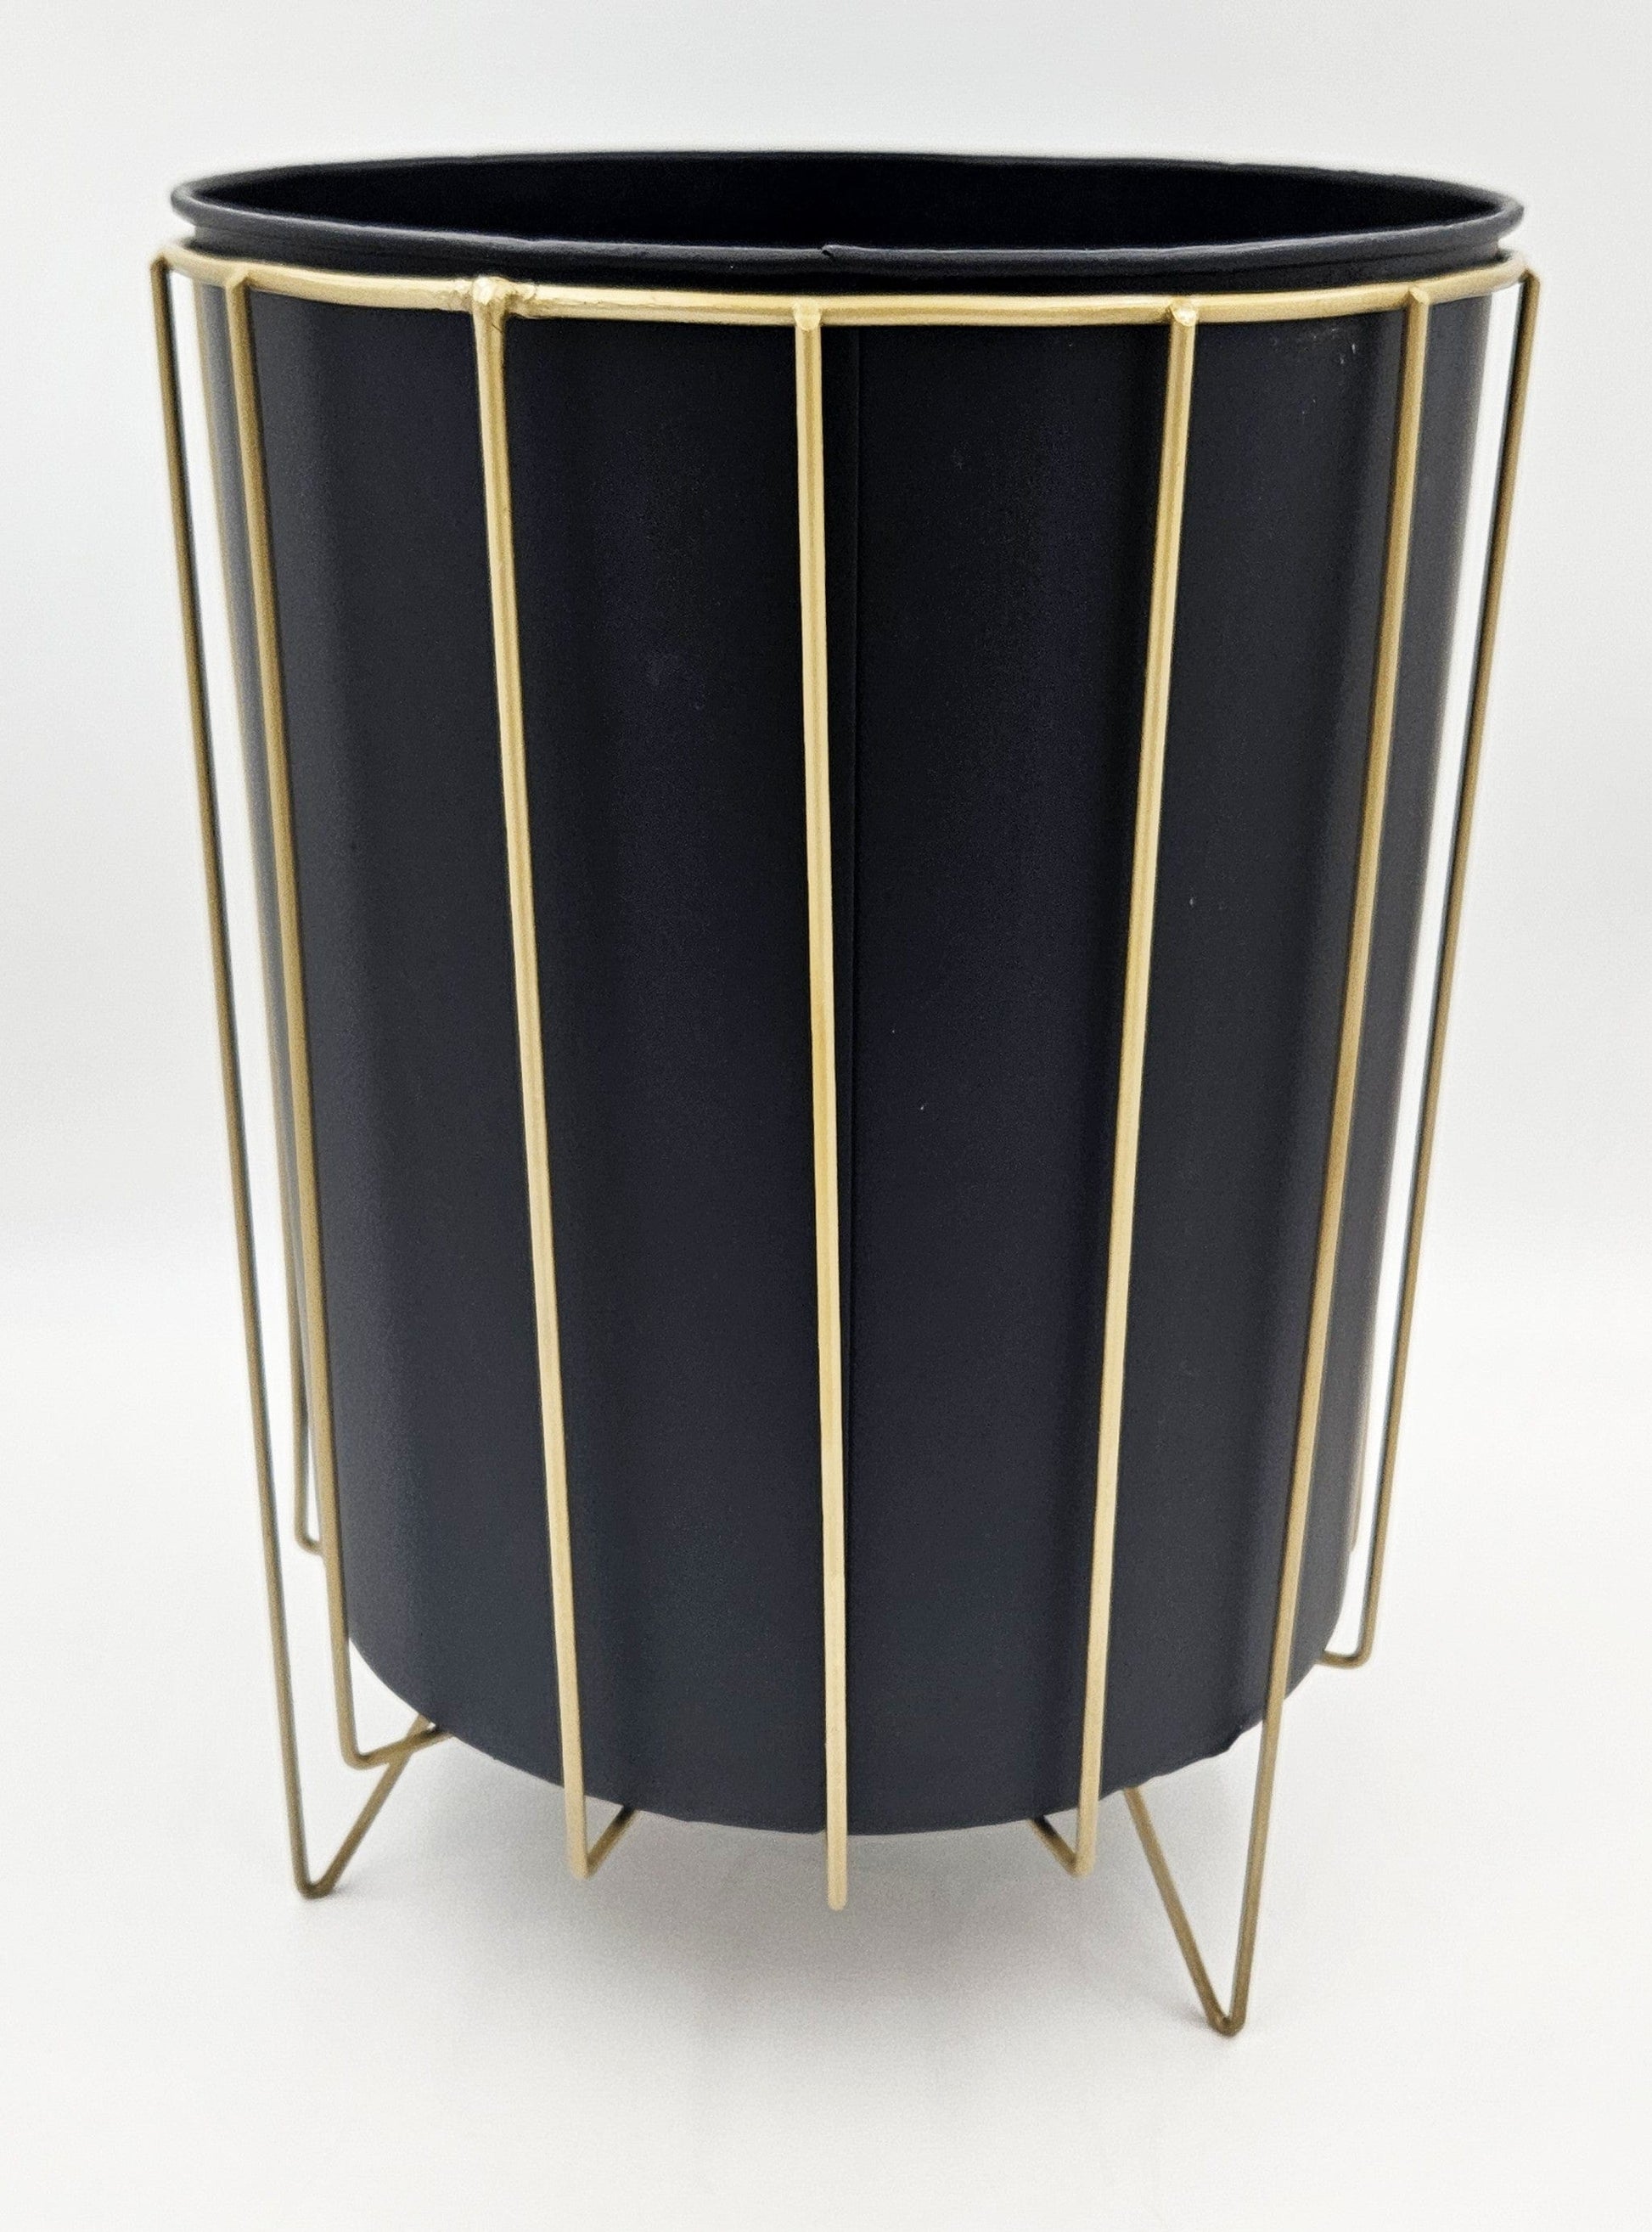 MCM Trash Can Trash Can MCM Retro Atomic Hairpin Black and Gold Steel Trash Can